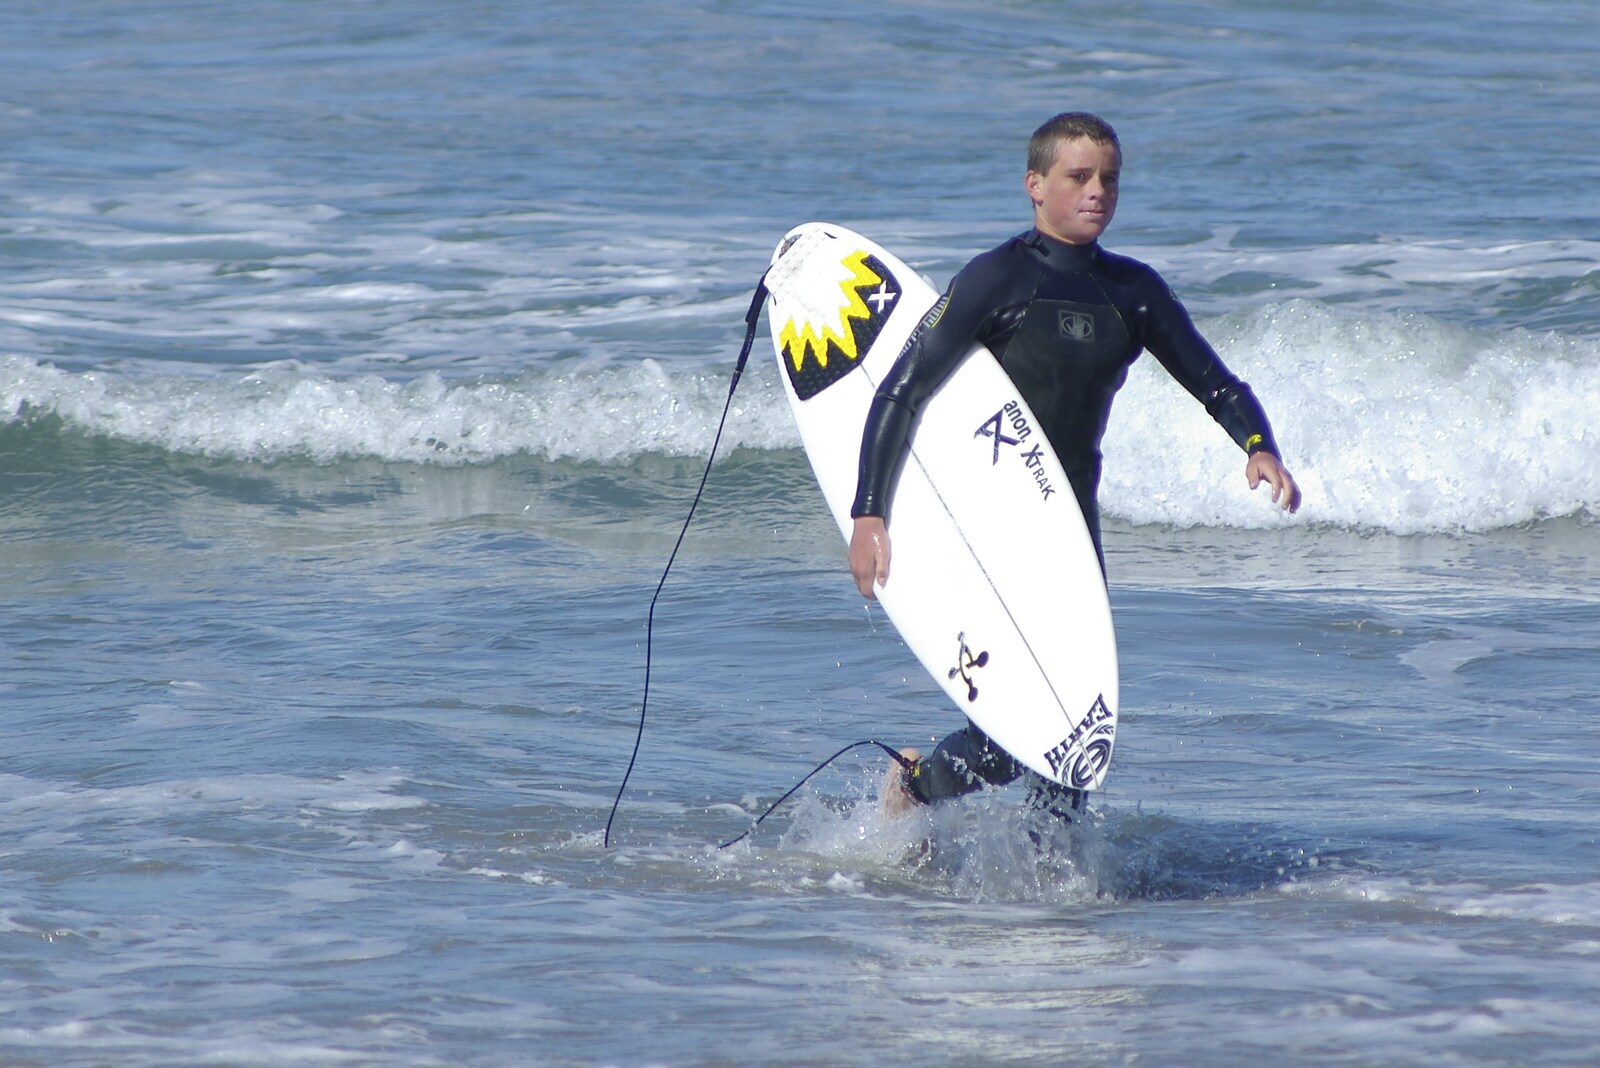 A surfer returns to the beach from Cruisin' Route 101, San Diego to Capistrano, California - 4th March 2006